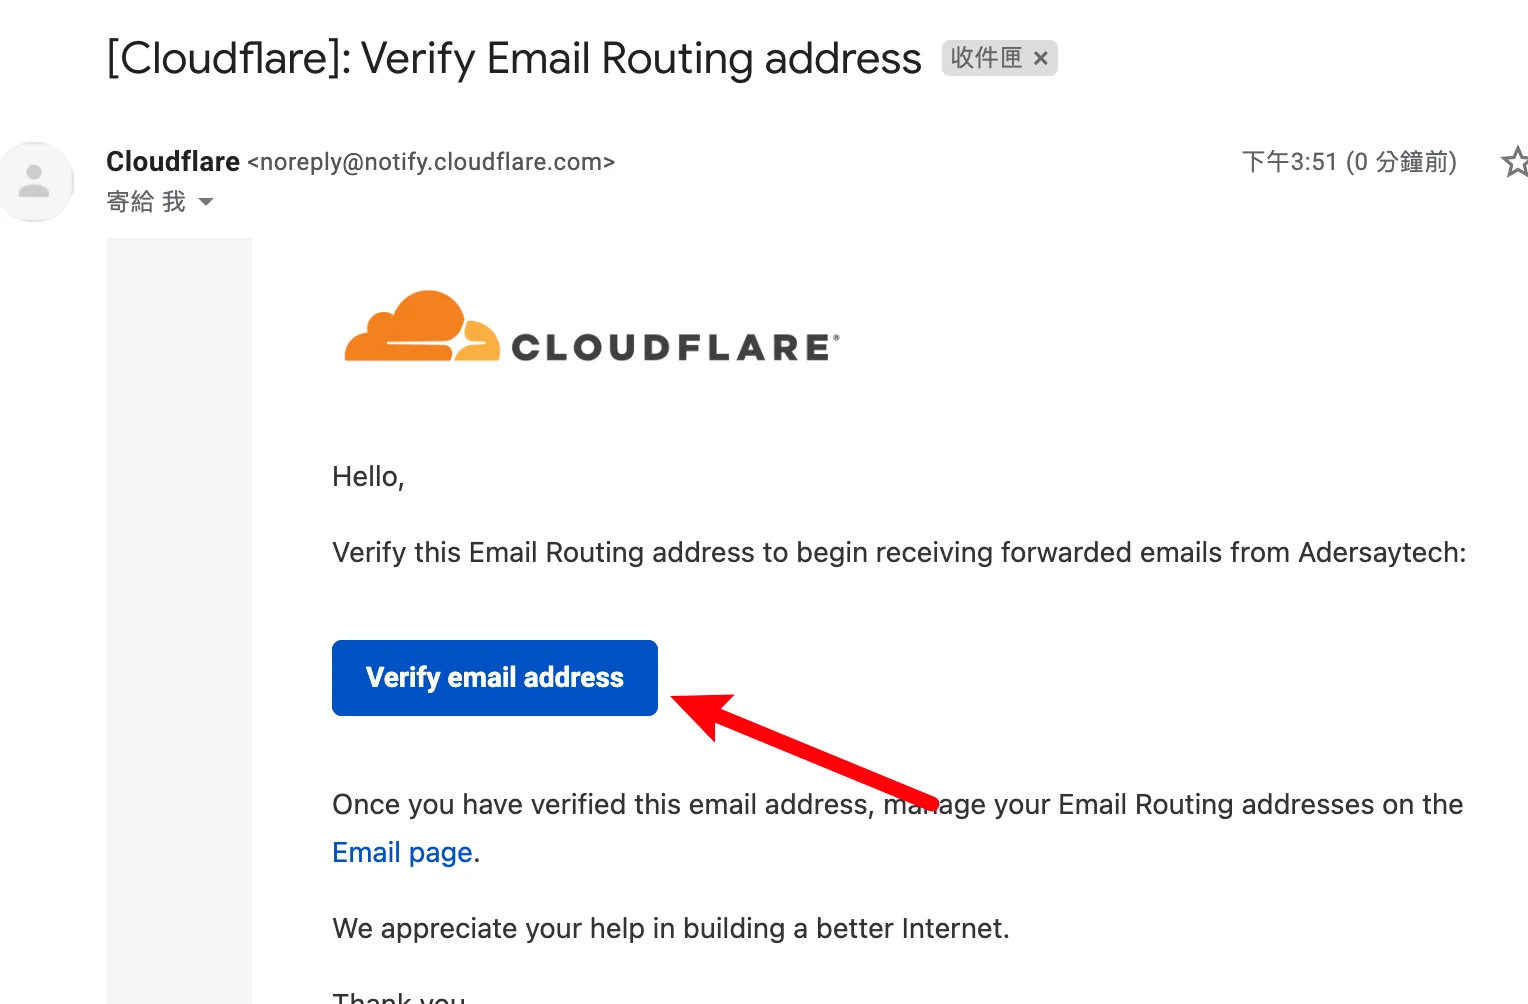 Cloudflare Email Routing 電子郵件路由，可免費自訂網域信箱！ 19